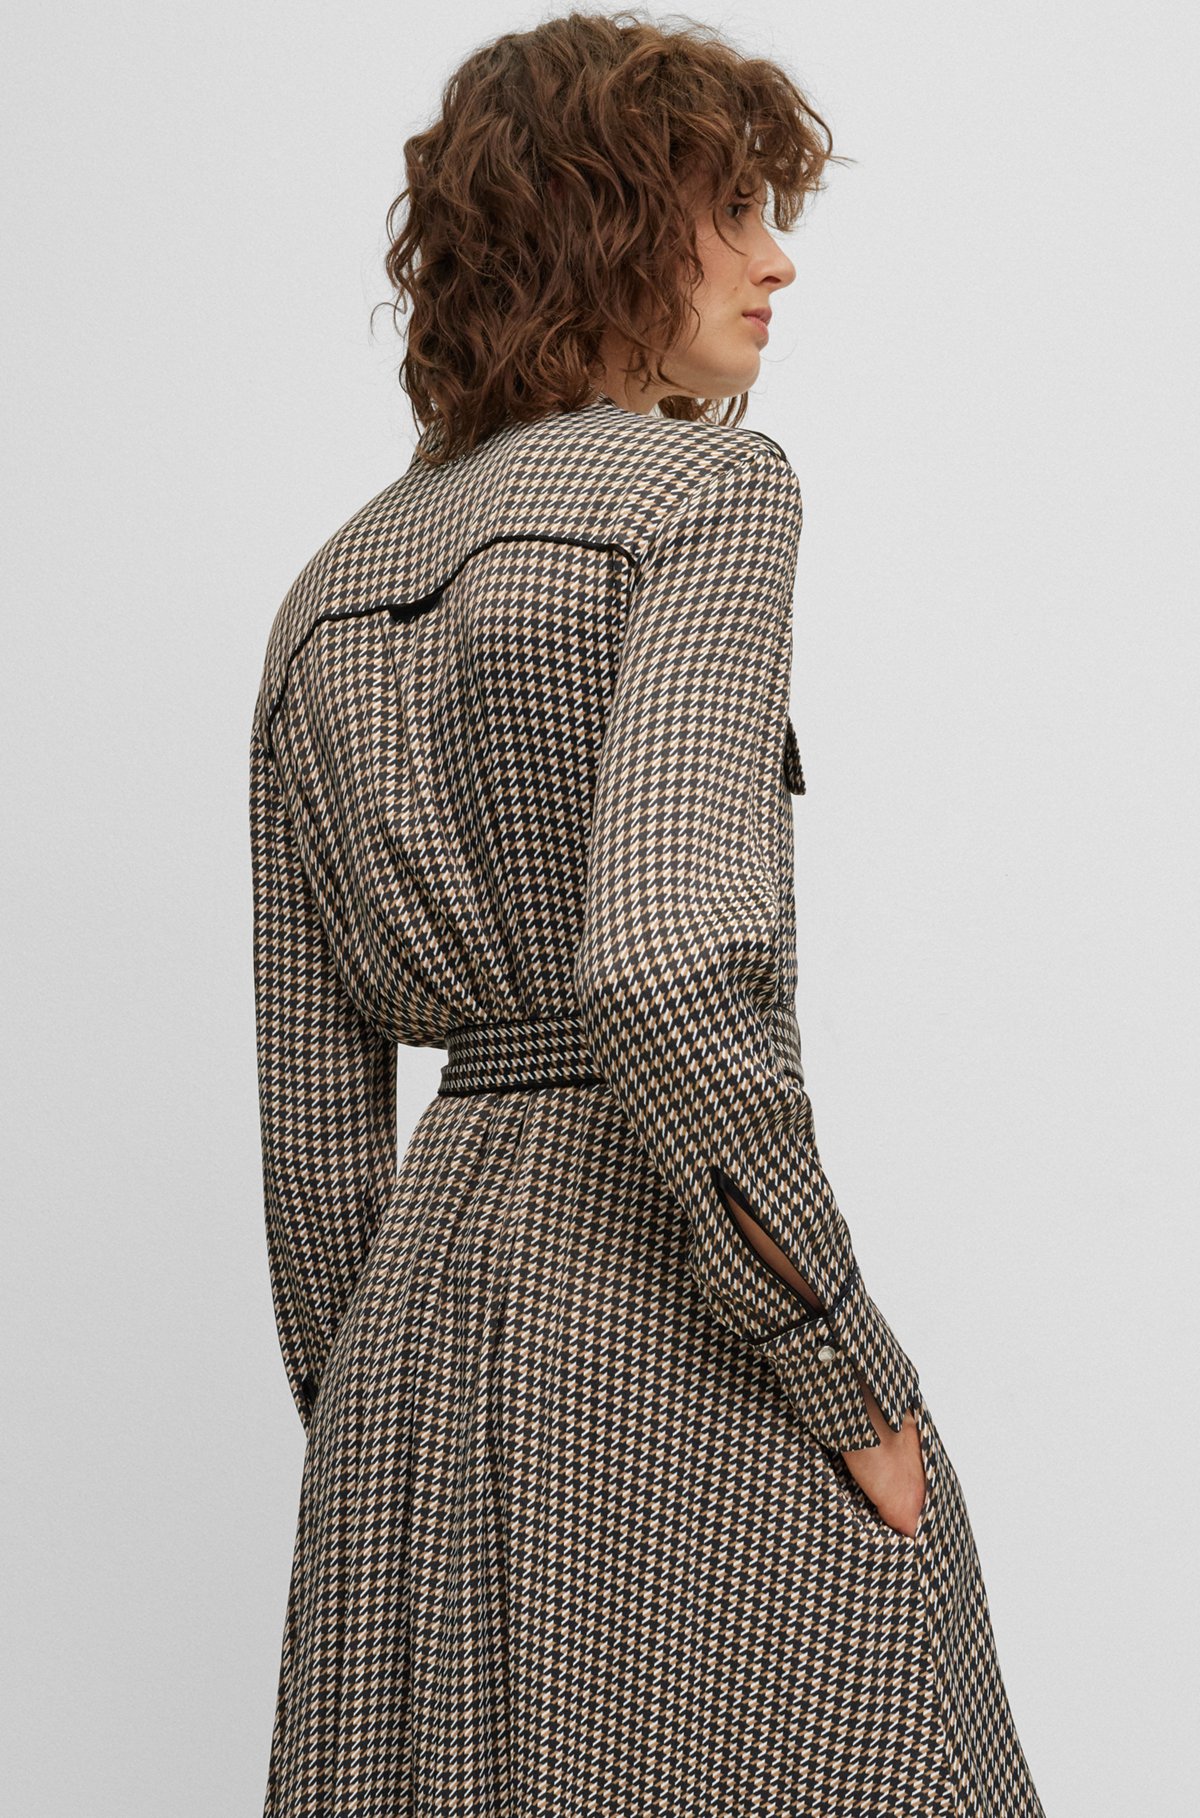 Long-sleeved shirt dress with houndstooth motif, Patterned